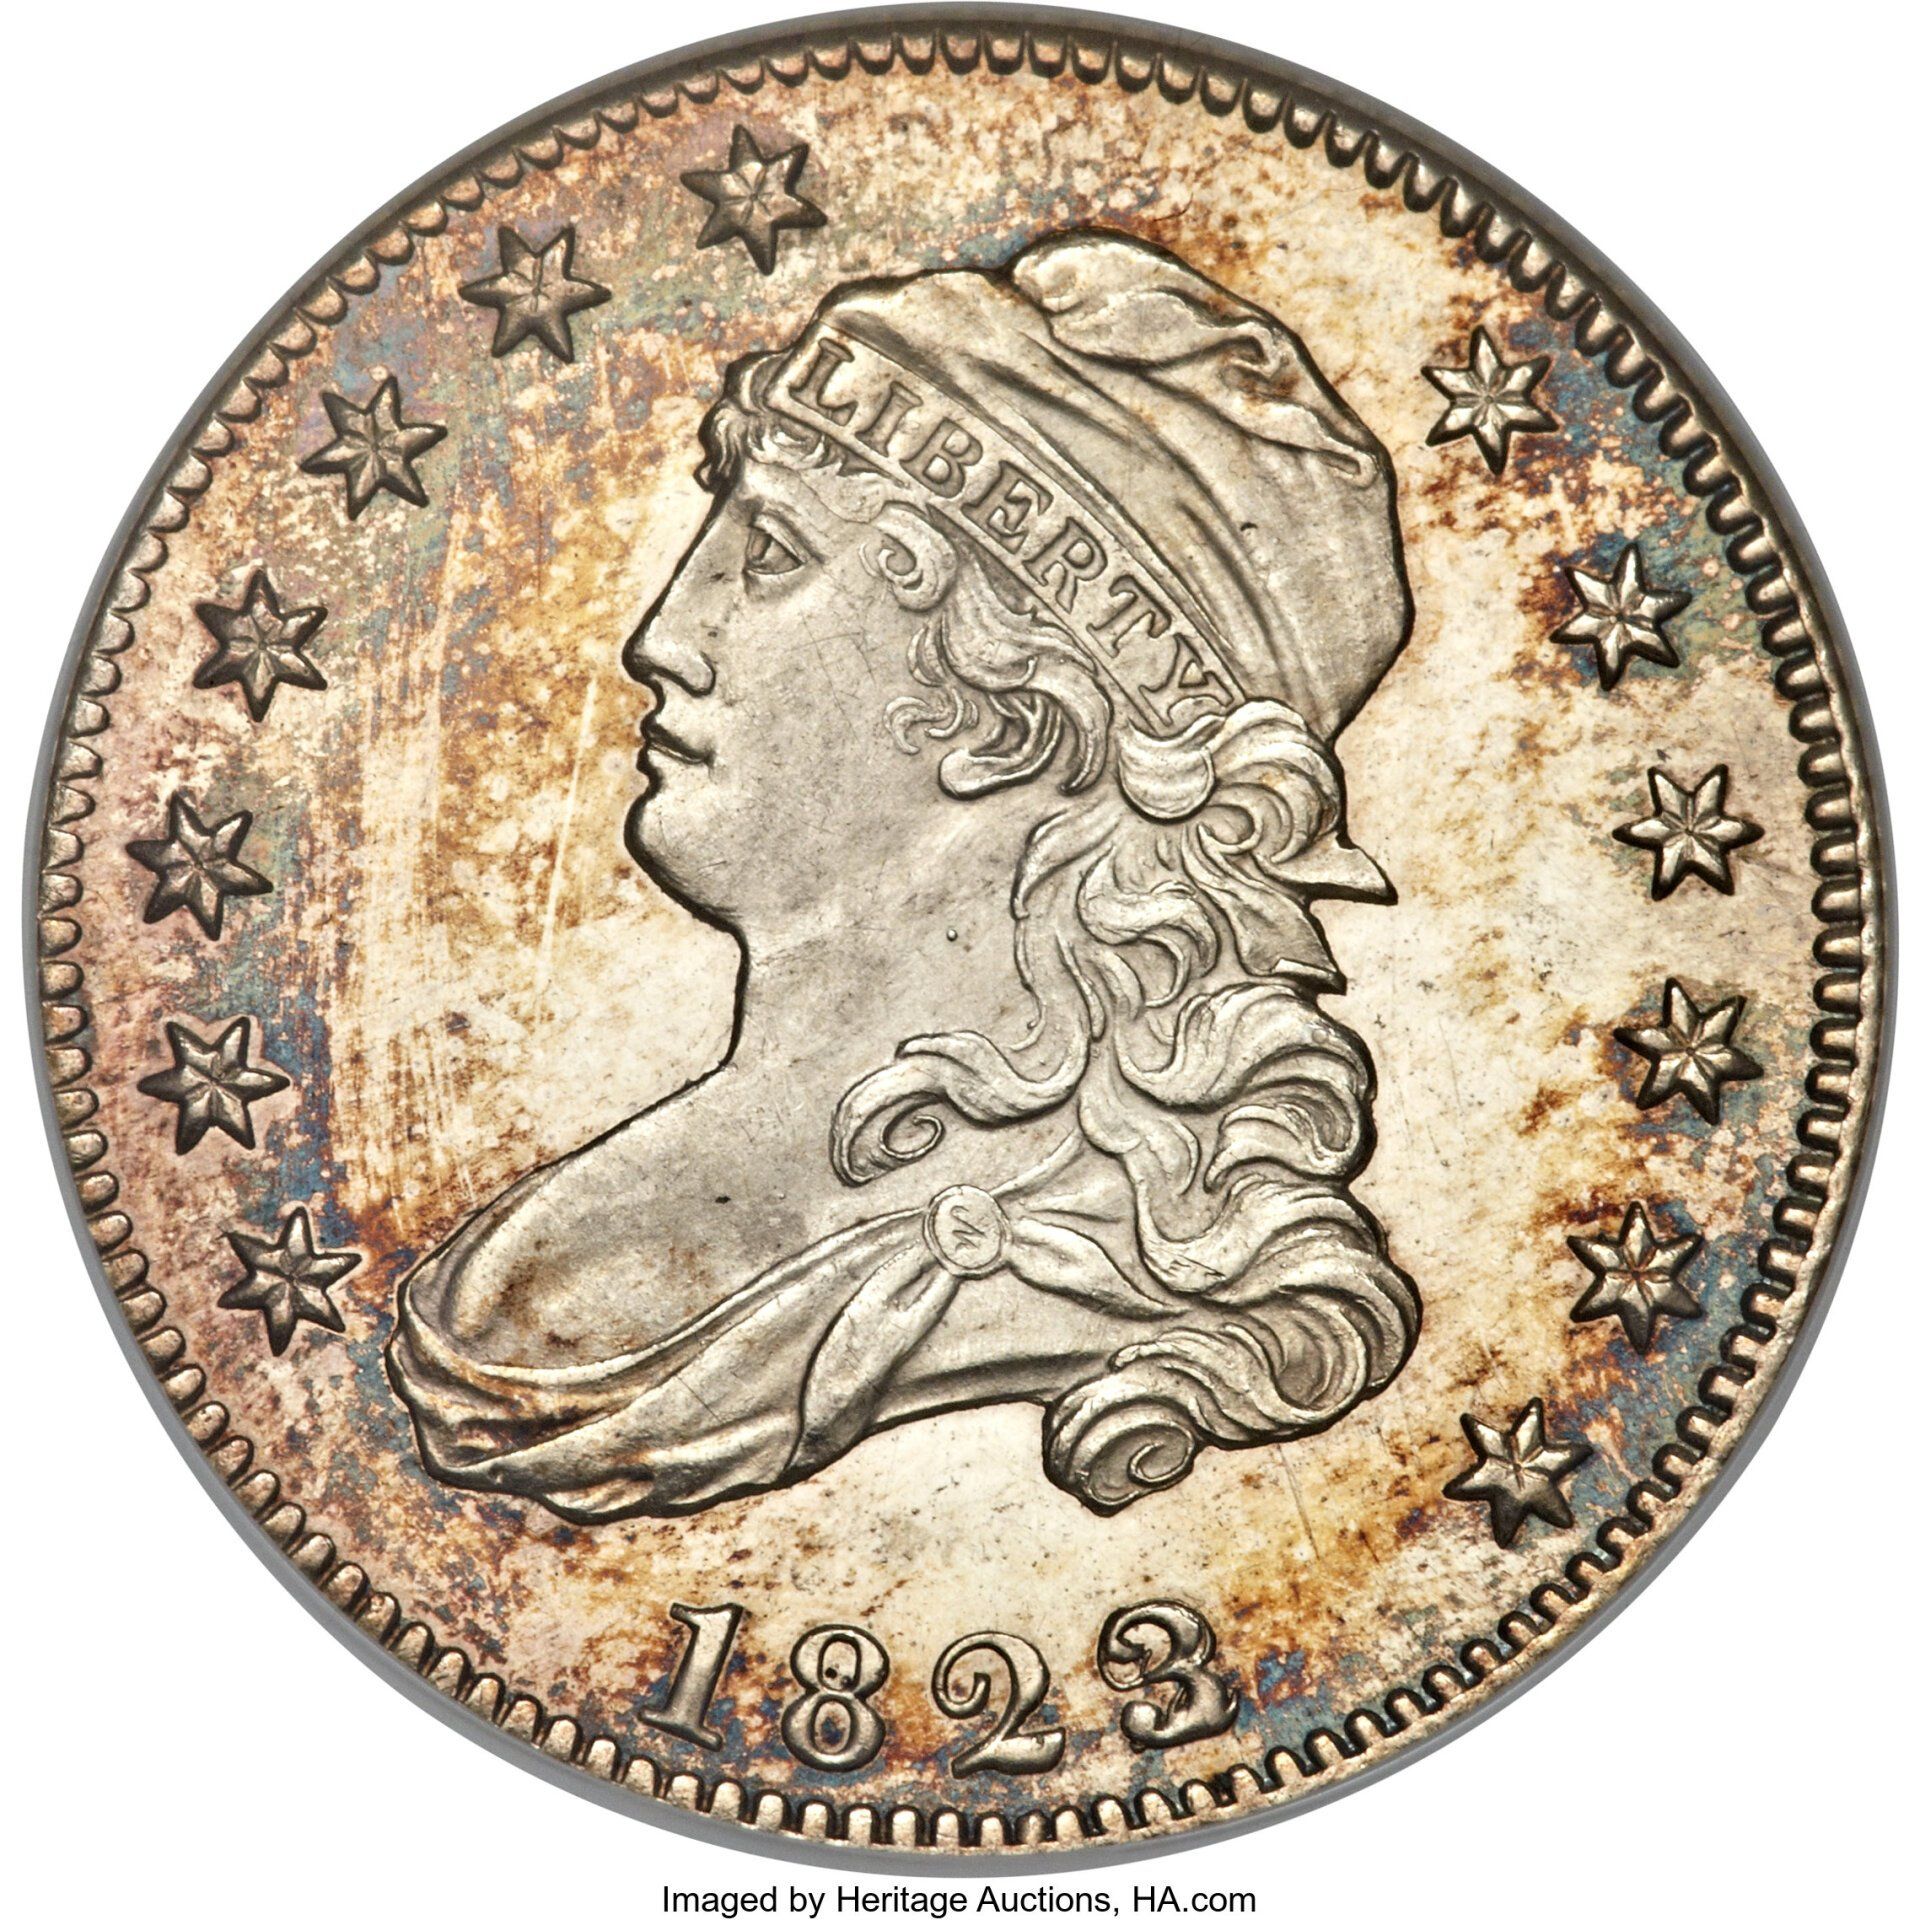 1823 Capped Bust quarter image courtesy of Heritage Auctions, HA.com